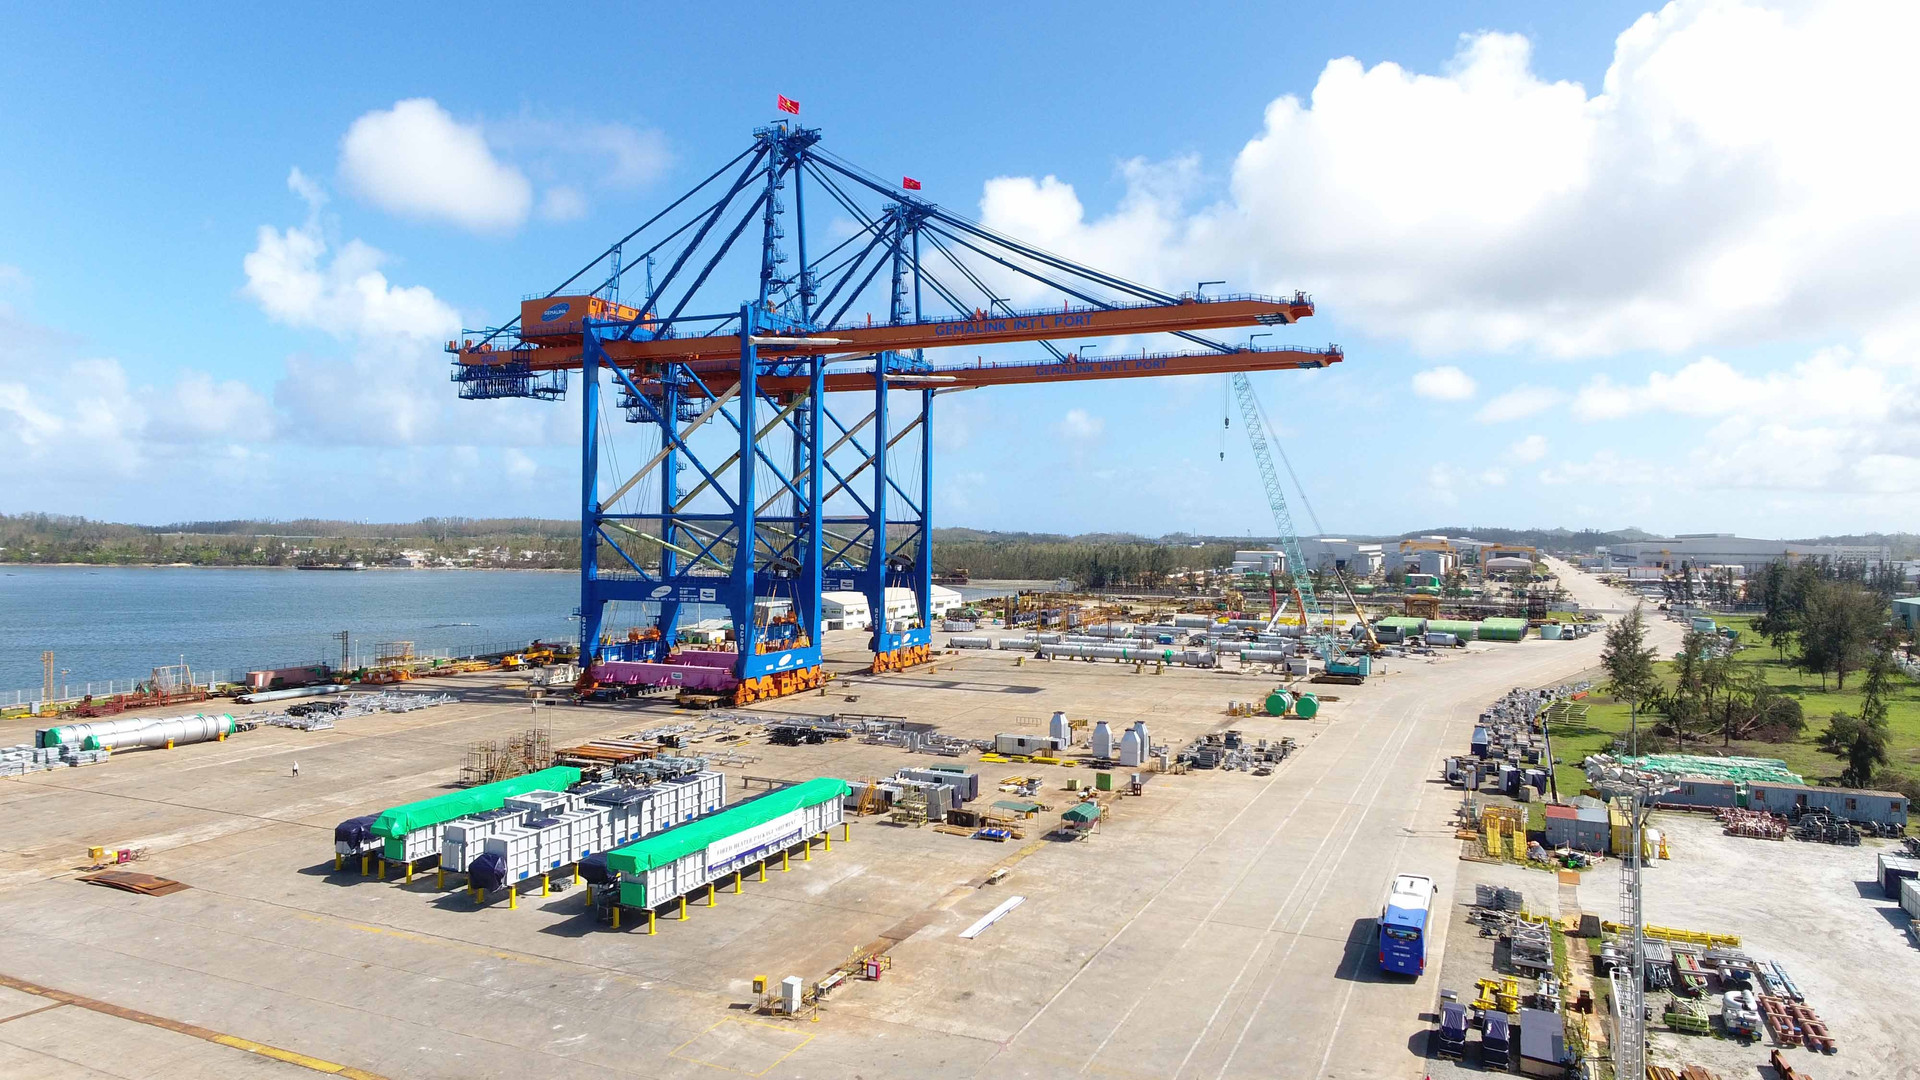 These super giant cranes are capable of handling cargo containers of up to 65 tons from large mother ships up to 200,000 DWT